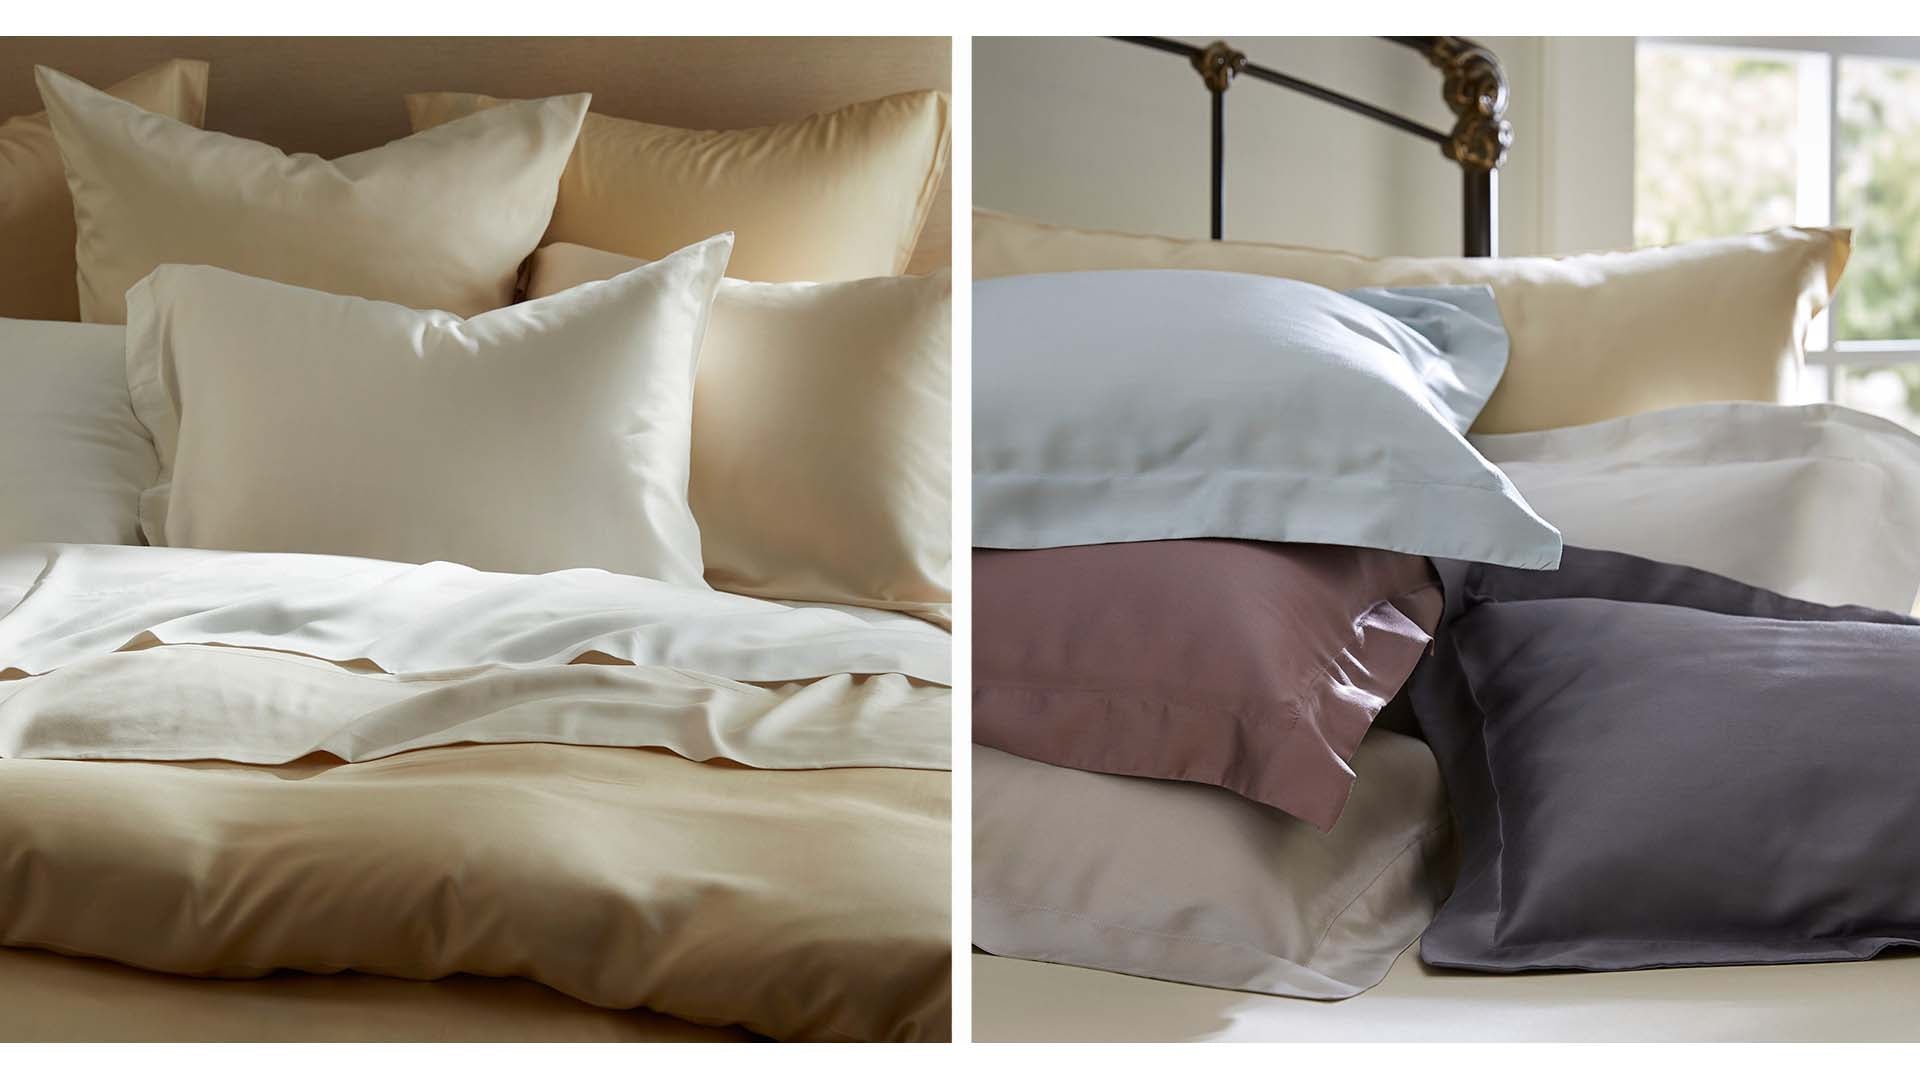 Luxury Modal Bedding Buyer’s Guide: SDH Legna Classic and Home Treasures Athens